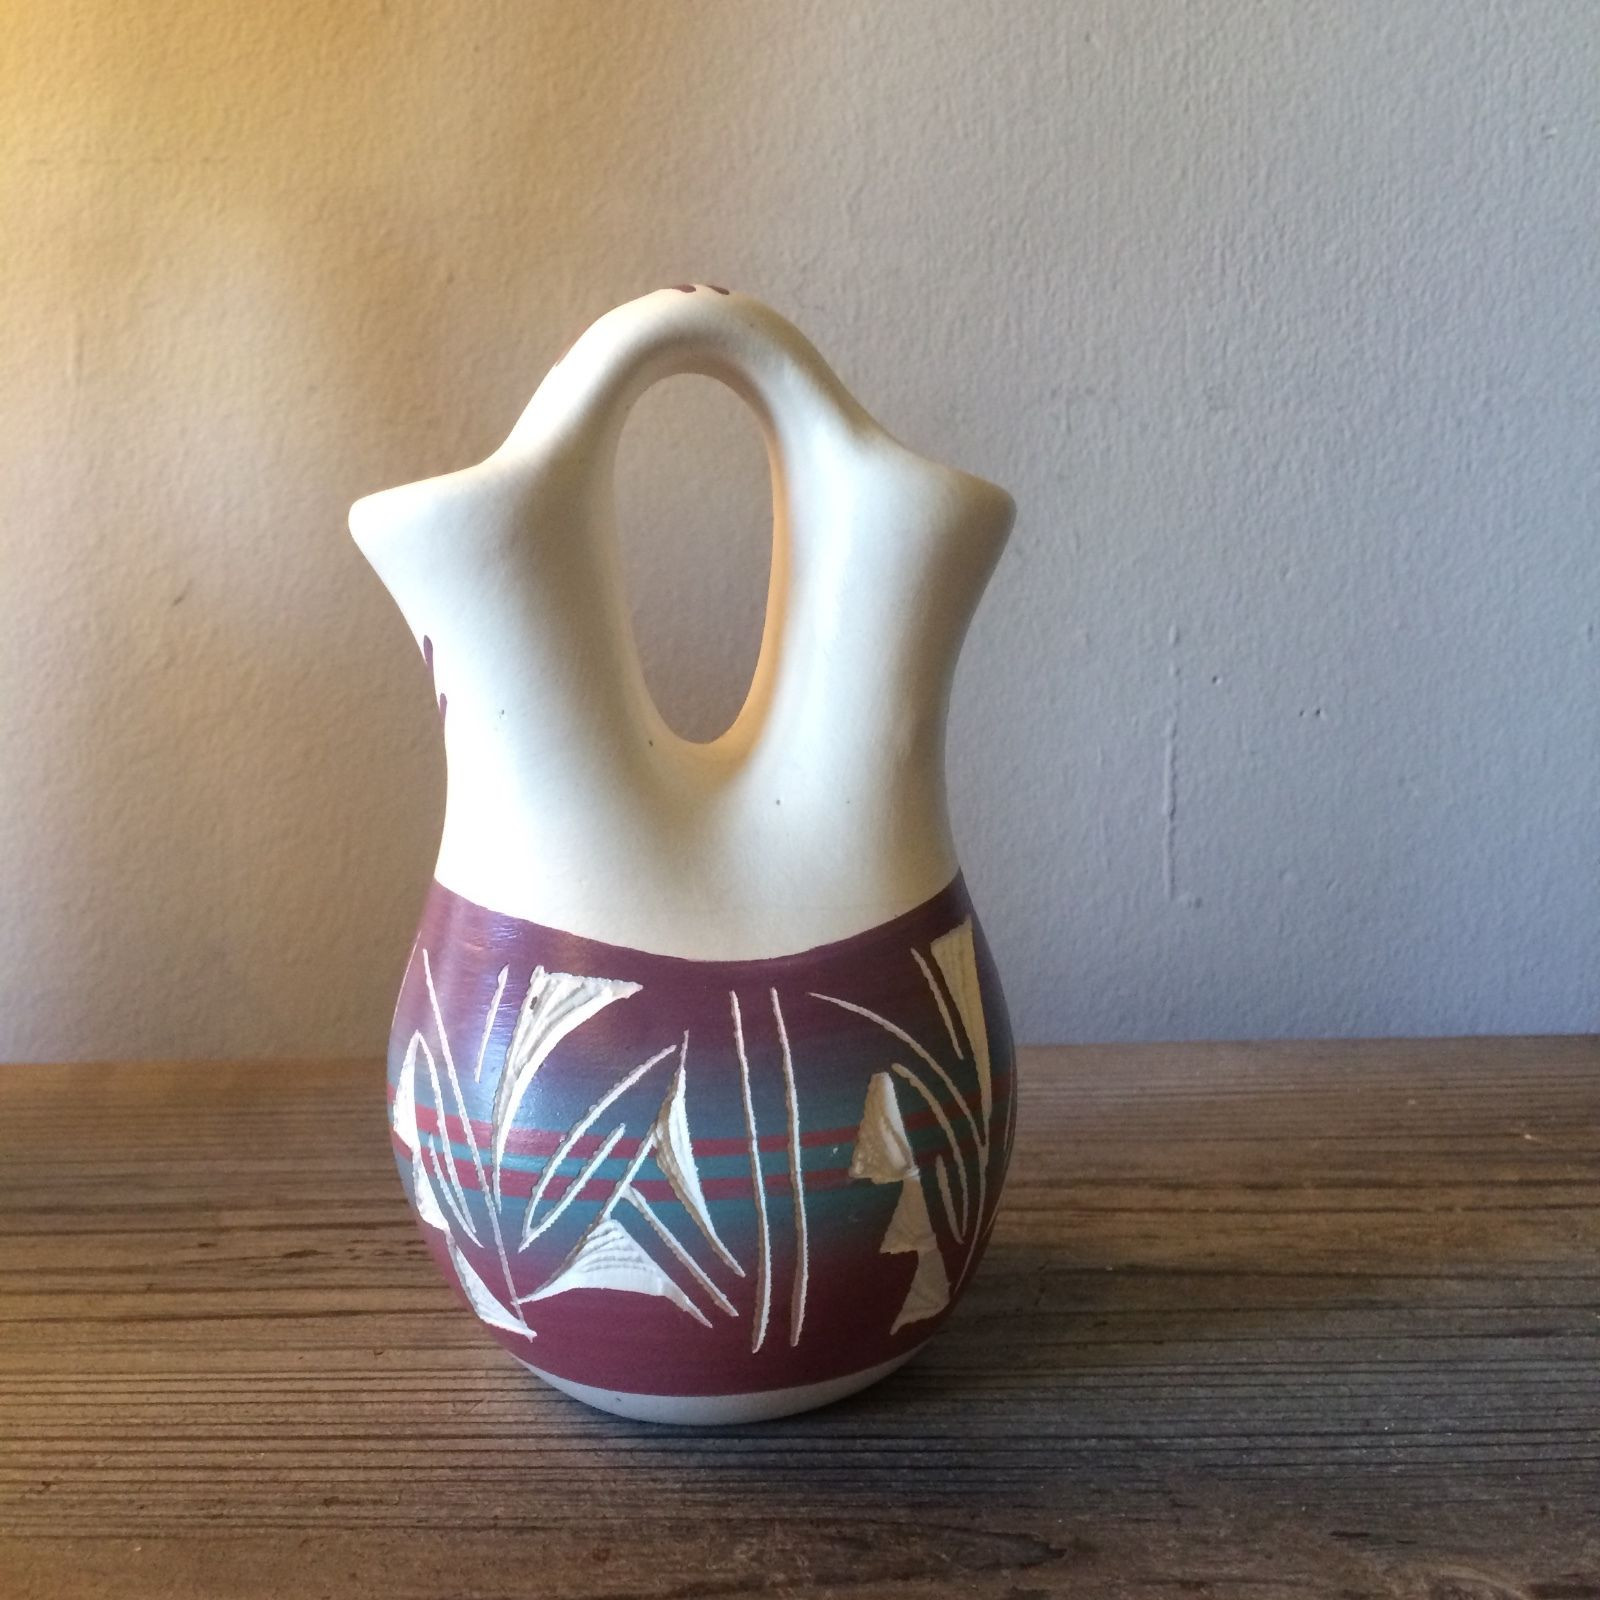 horsehair wedding vase of small wedding vase signed pottery mesa verde pottery rockwell with 1 of 11only 1 available